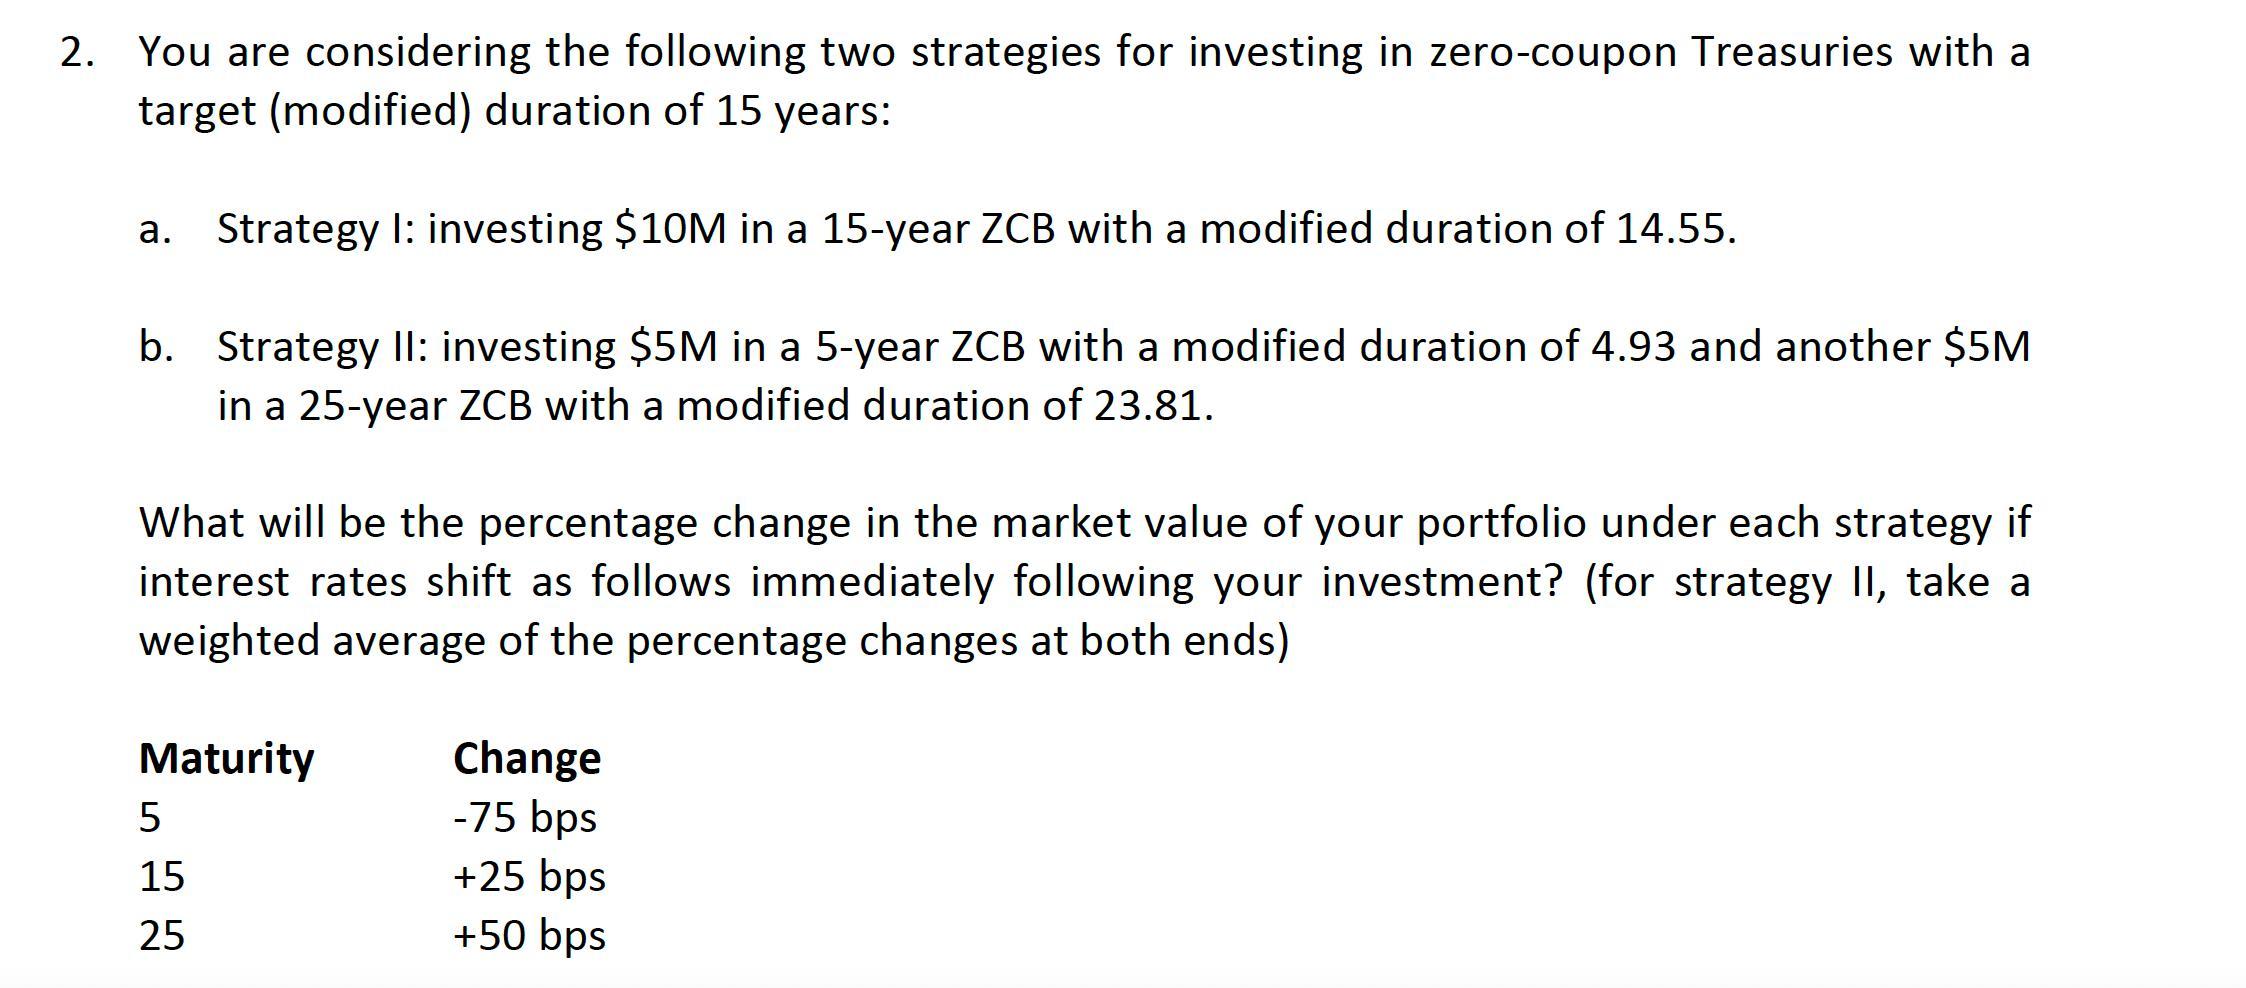 2. You are considering the following two strategies for investing in zero-coupon Treasuries with a target (modified) duration